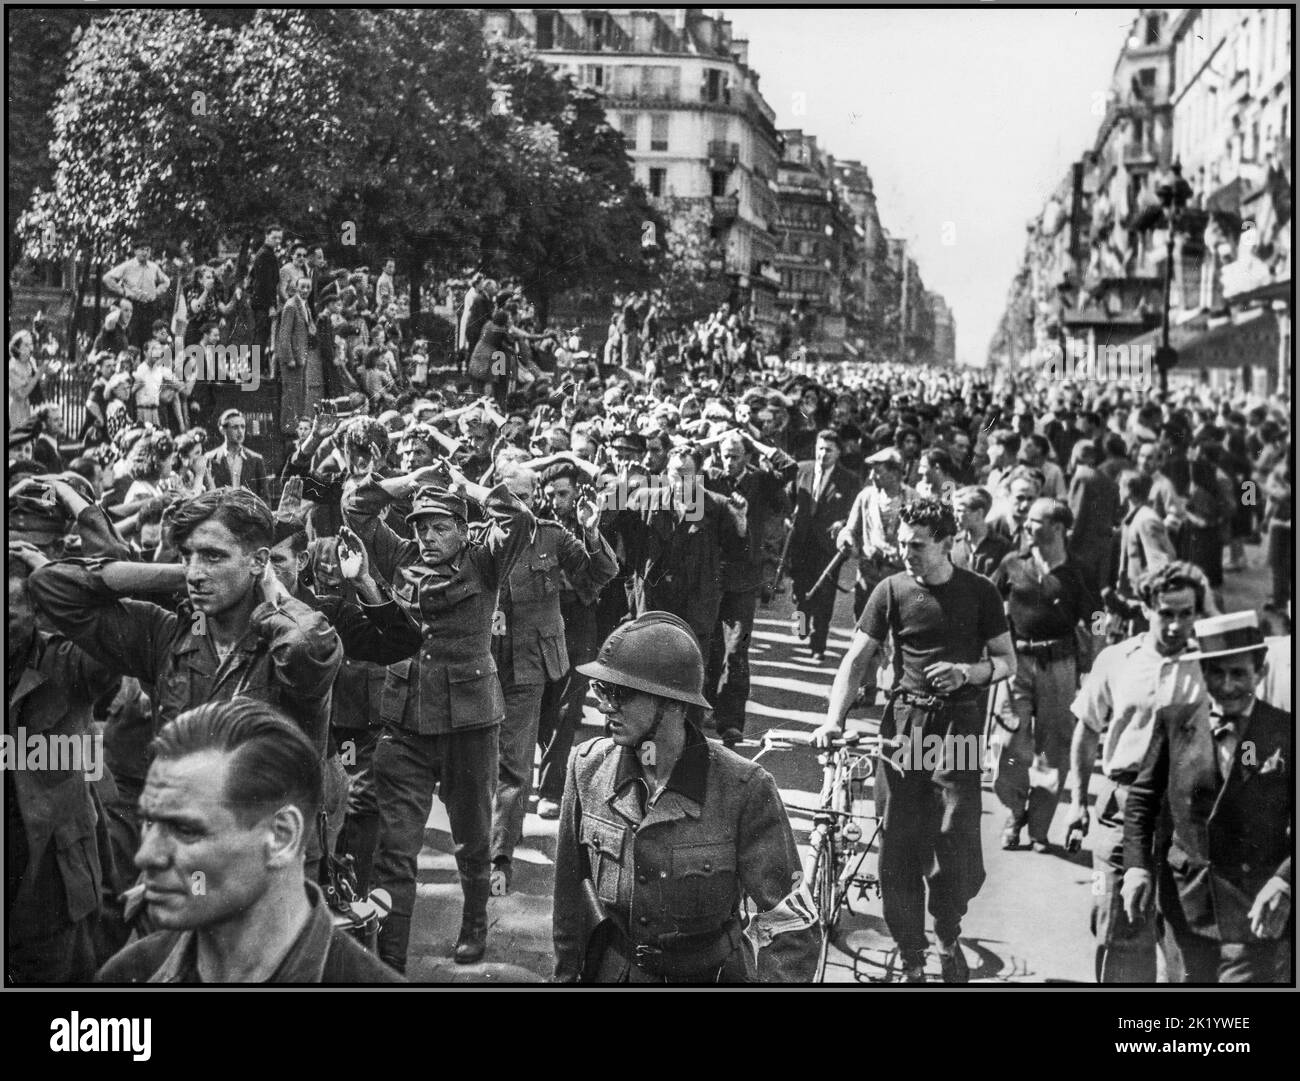 PARIS LIBERATION NAZI GERMANY SURRENDERS Hands on heads former Nazi occupiers WWII: Europe: France; 'German POWs - Paris sees the Germans go' to the goading and relief of the Parisian residents. Date circa 25 August 1944 Stock Photo